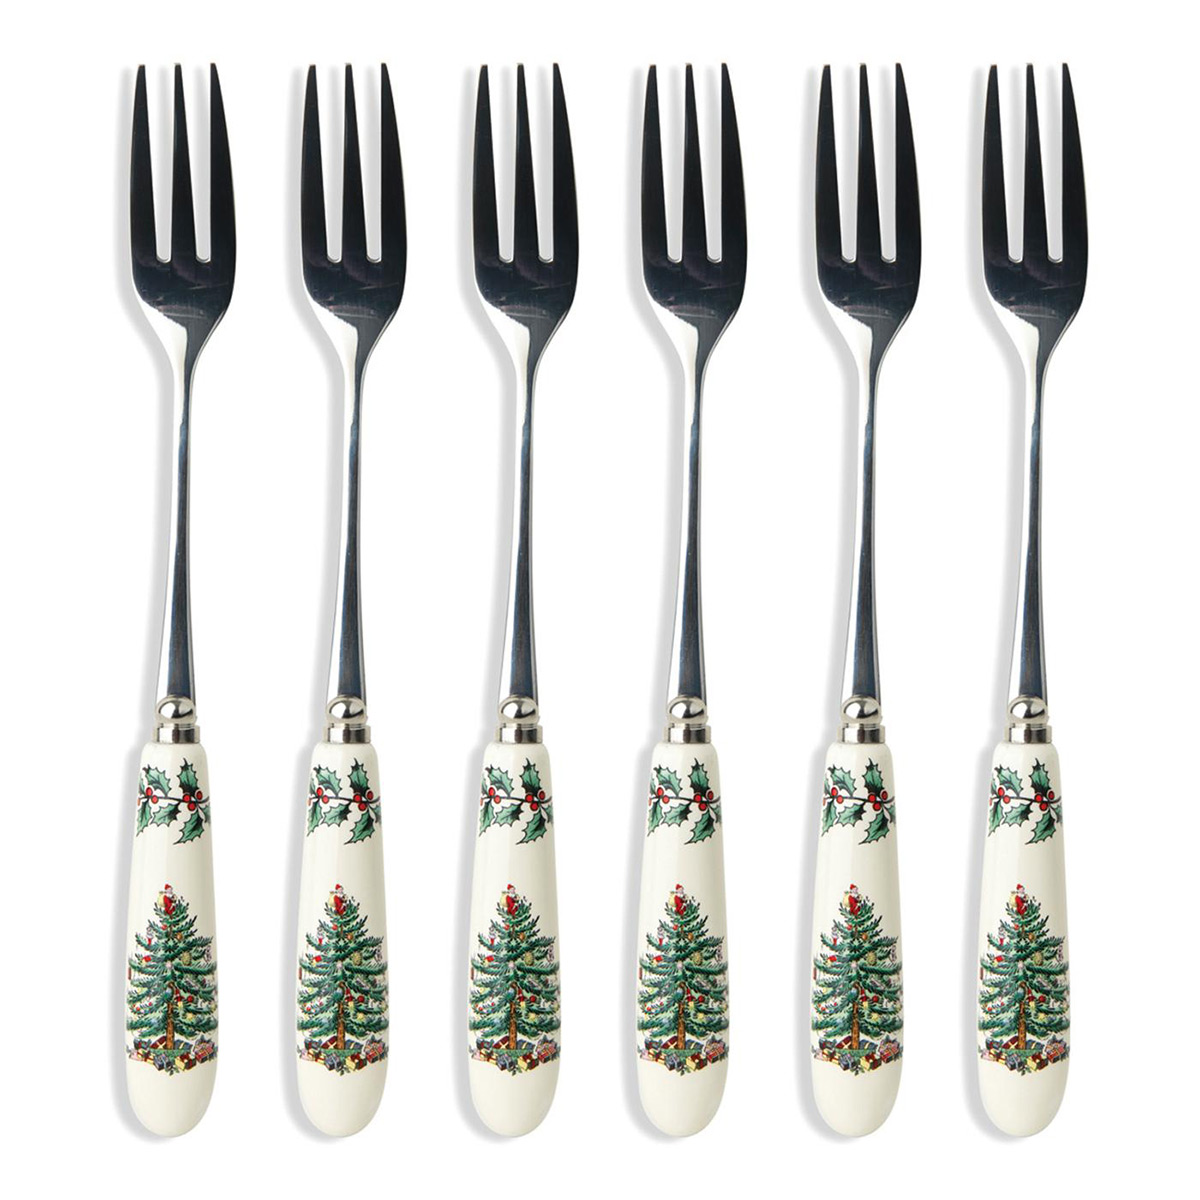 Spode Christmas Tree Cutlery Set Of 6 Pastry Forks, Ceramic Handle